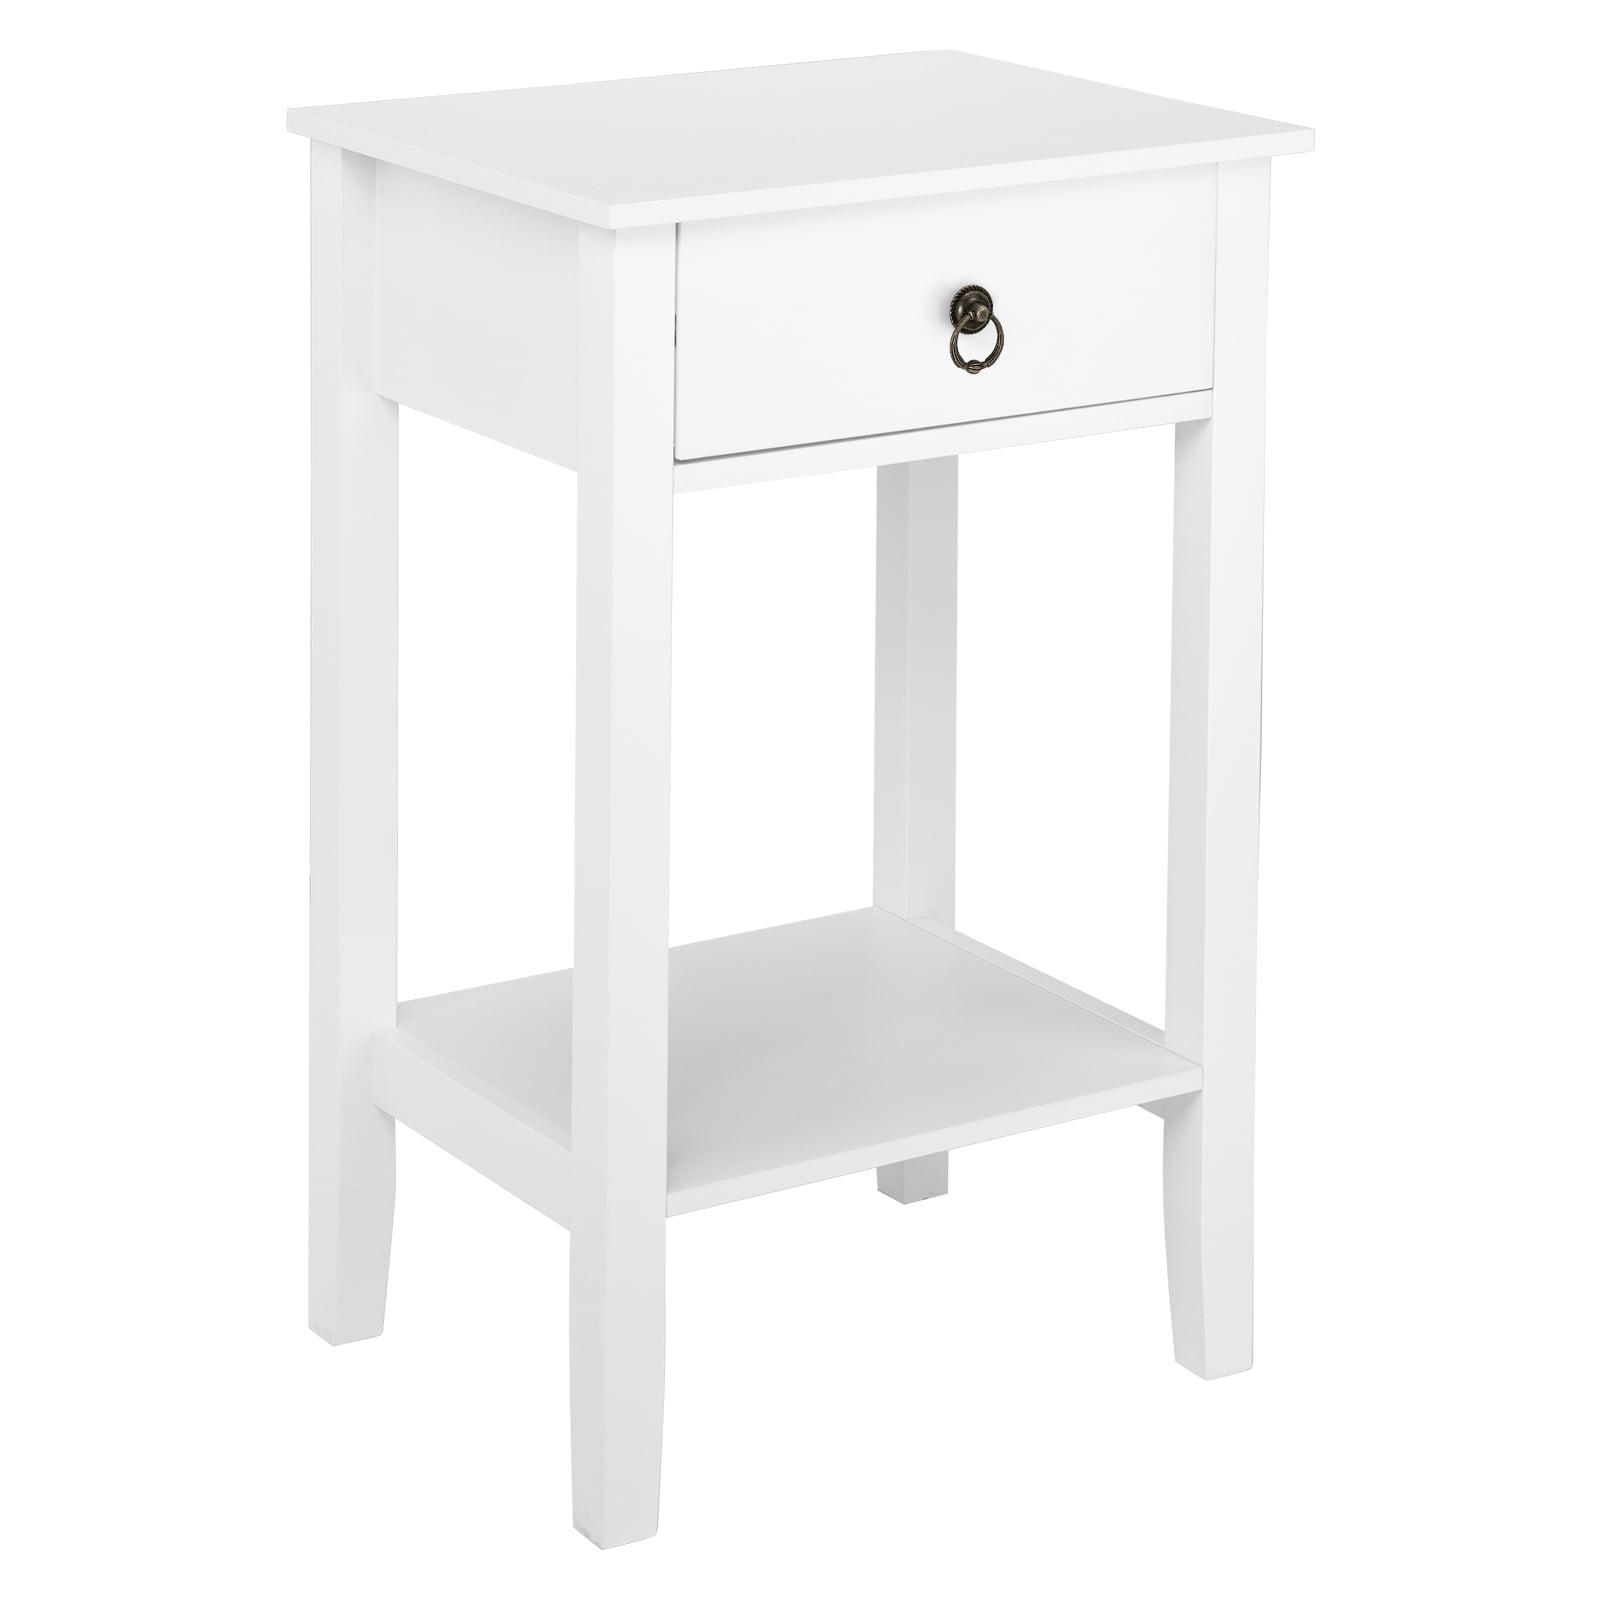 Simpl Utility Bedroom Bedside Table Storage Sabinet Multi-layer Nightstand White 